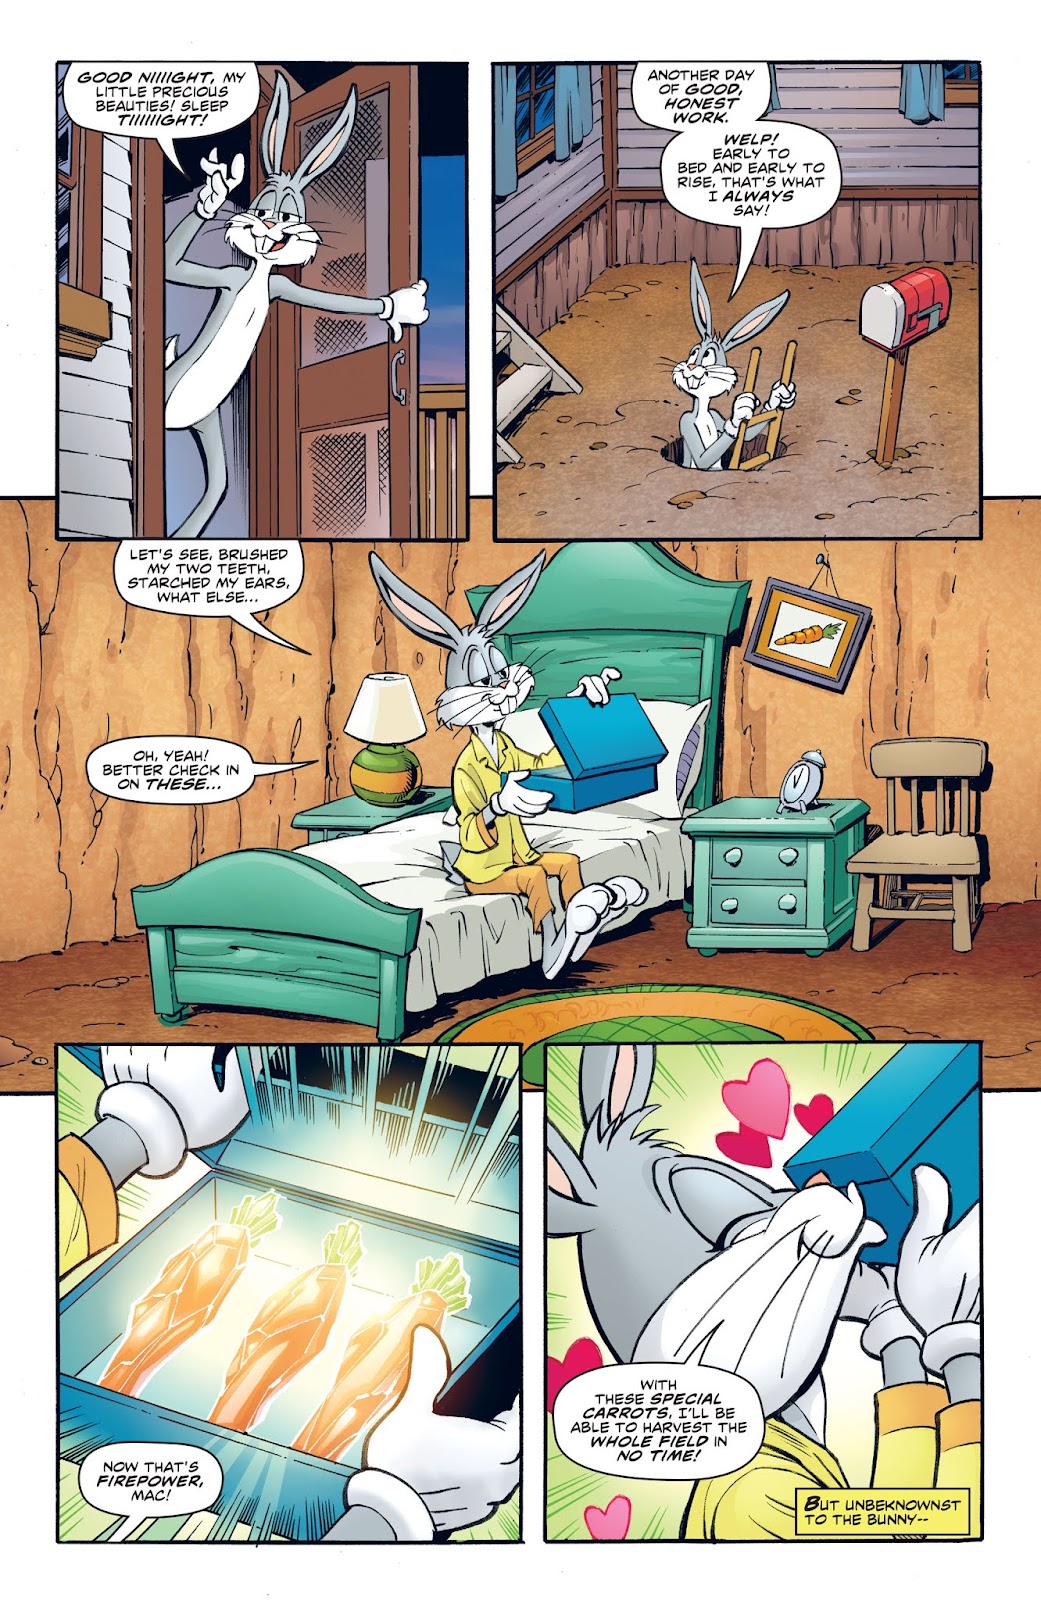 Dc Meets Looney Tunes Tpb Part 1 Read All Comics Online For Free